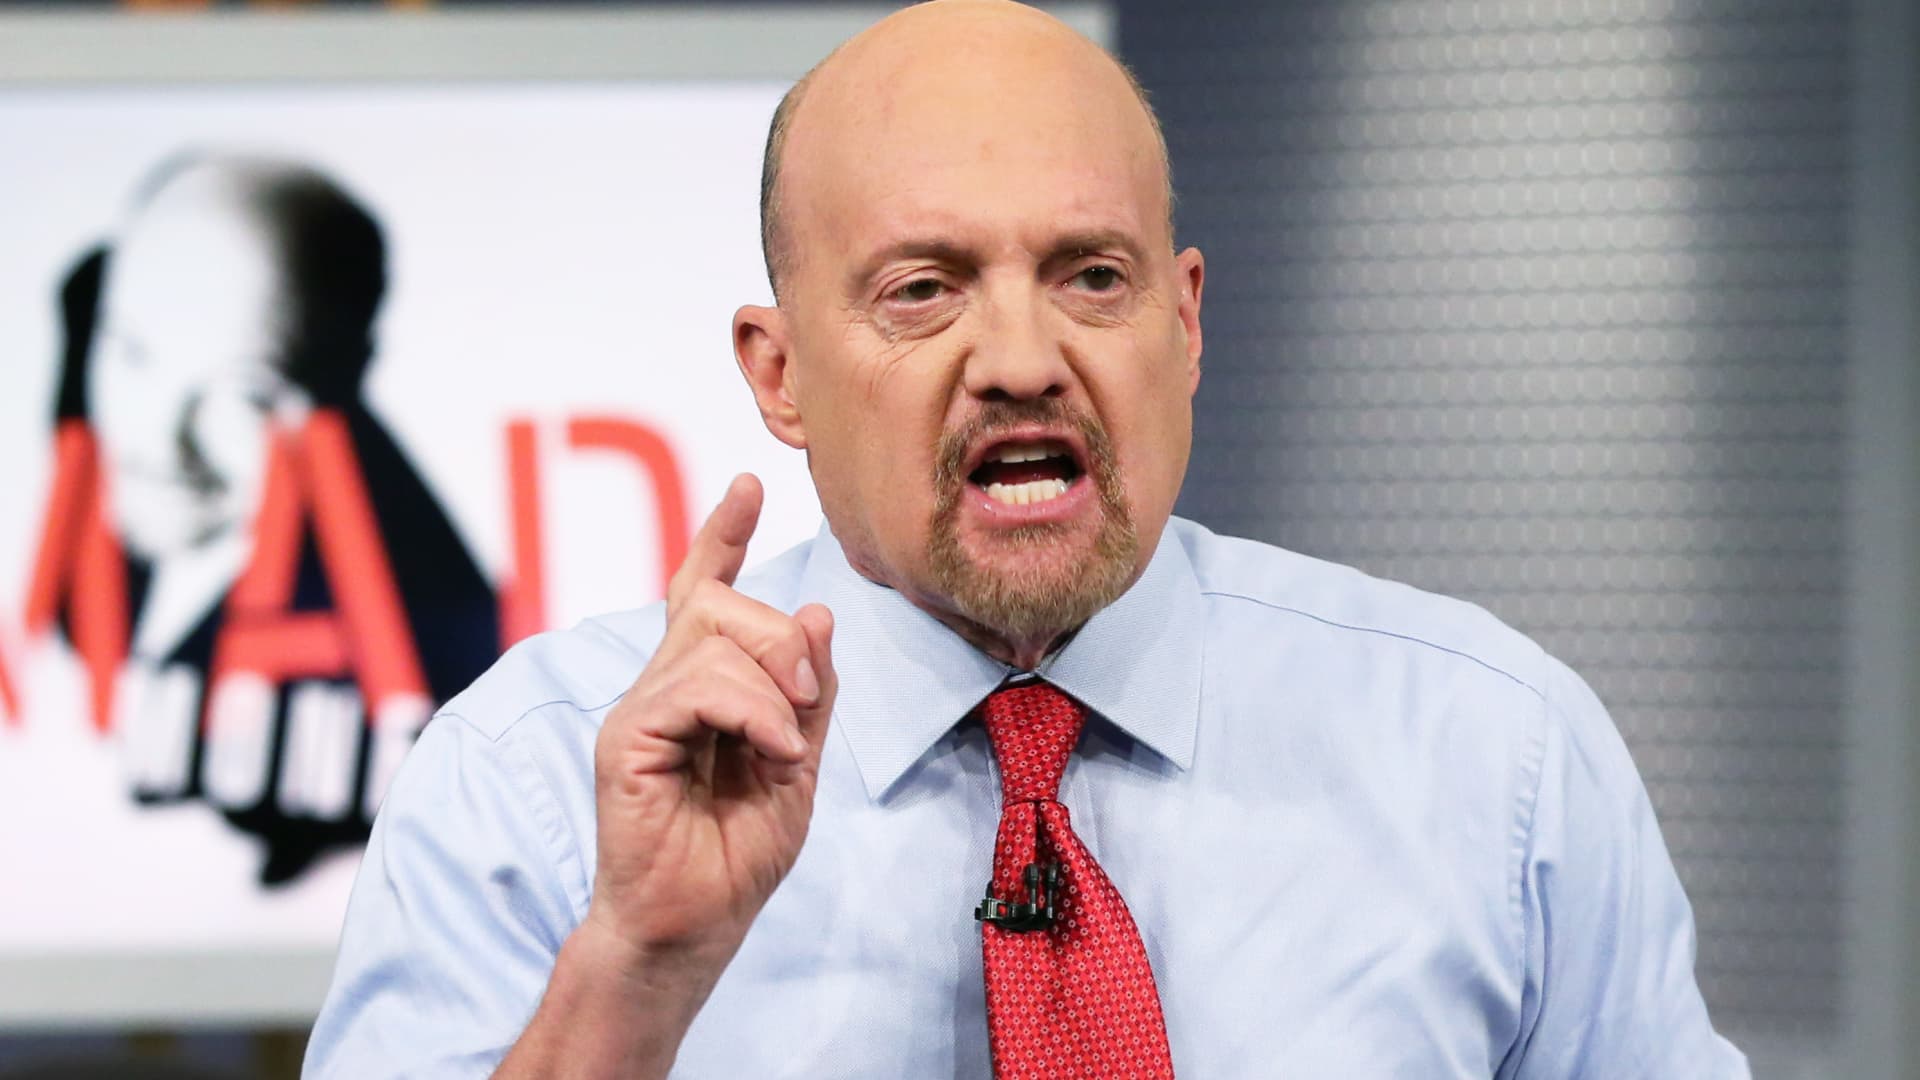 Jim Cramer says to consider buying these 10 cheap, high growth stocks with dividend protection